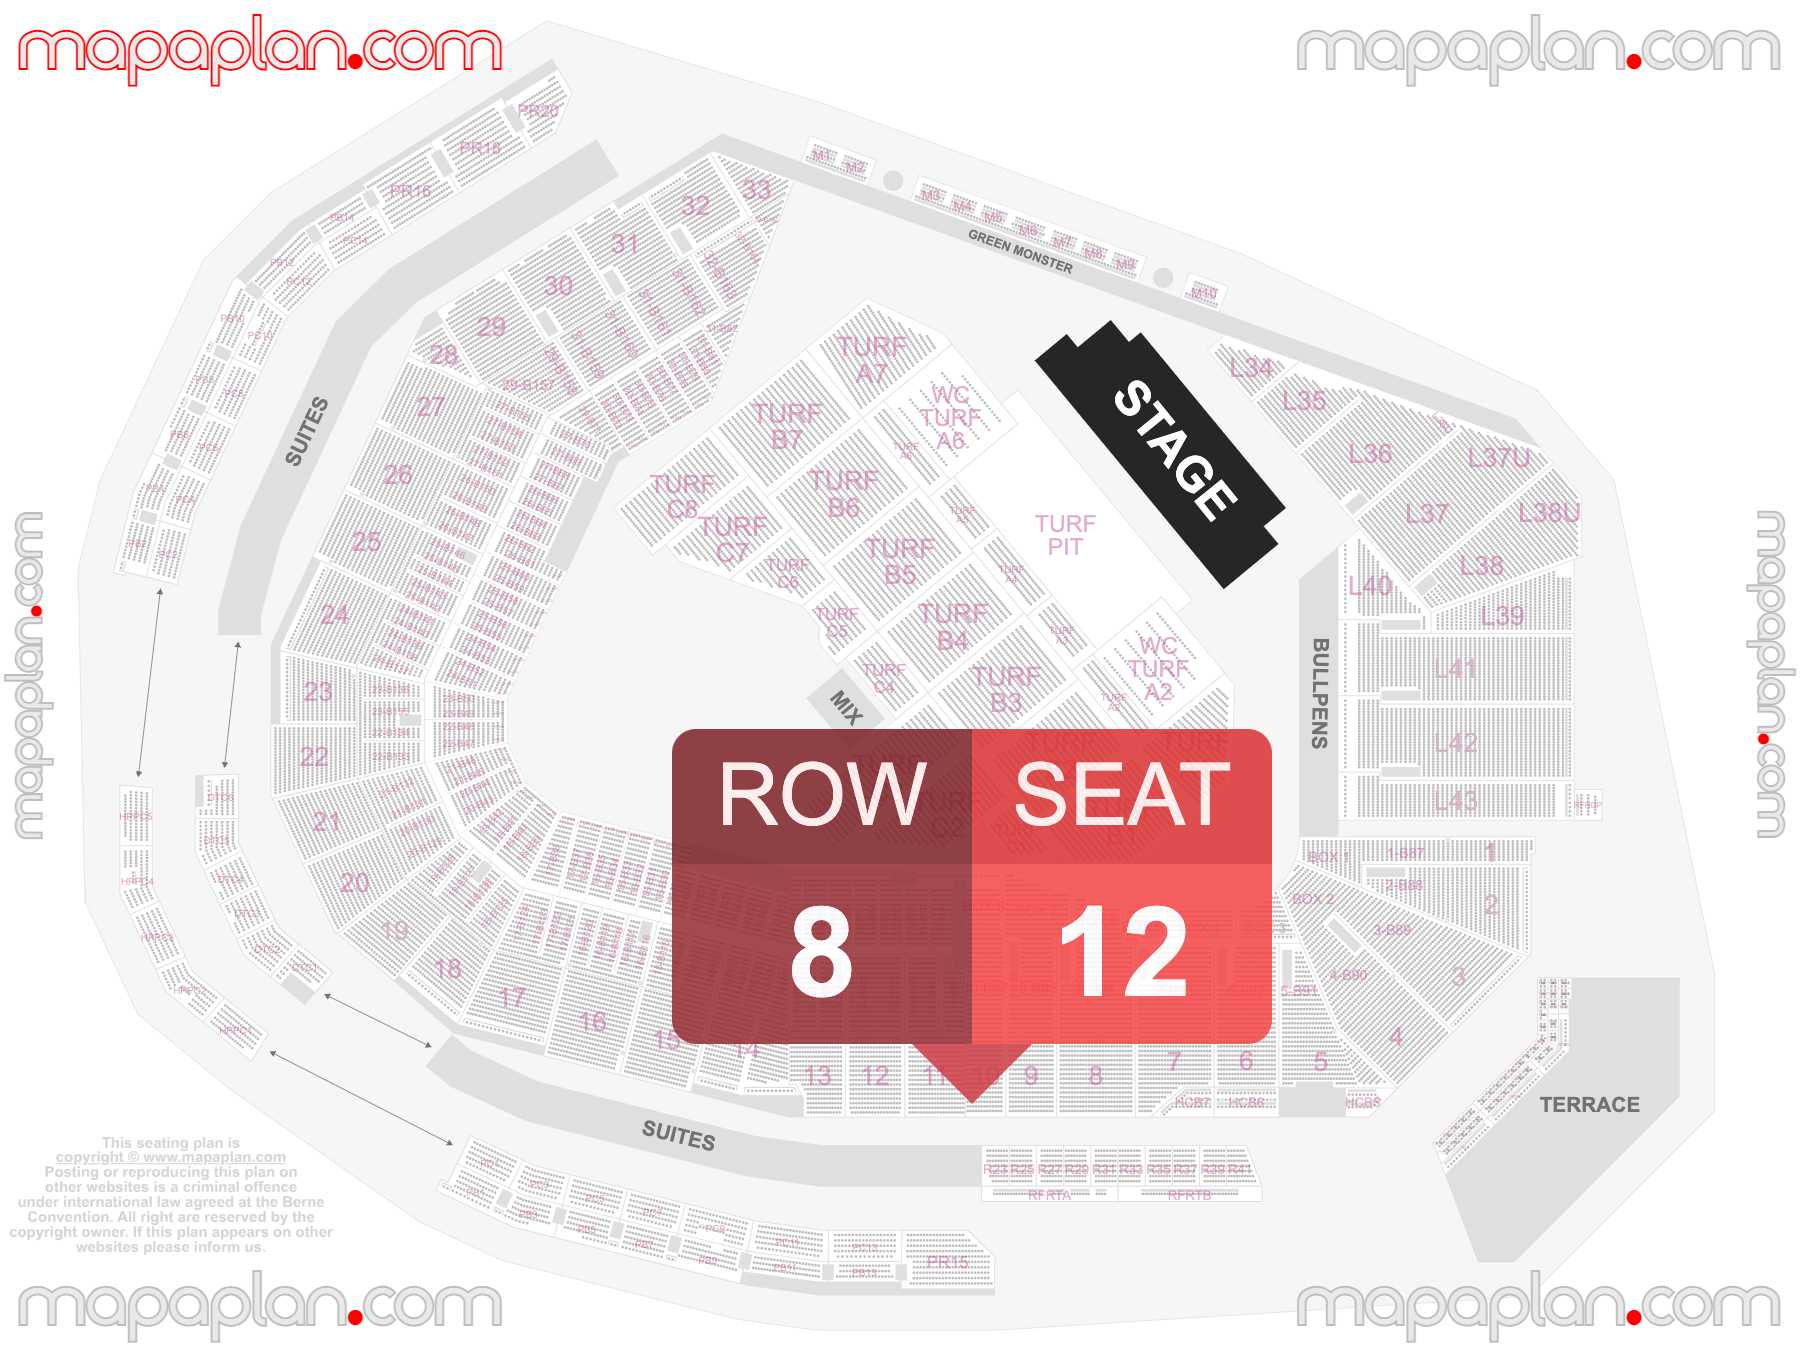 Boston Fenway Park seating chart Concert & Boston Red Sox Stadium Baseball detailed seat numbers and row numbering chart with interactive map plan layout